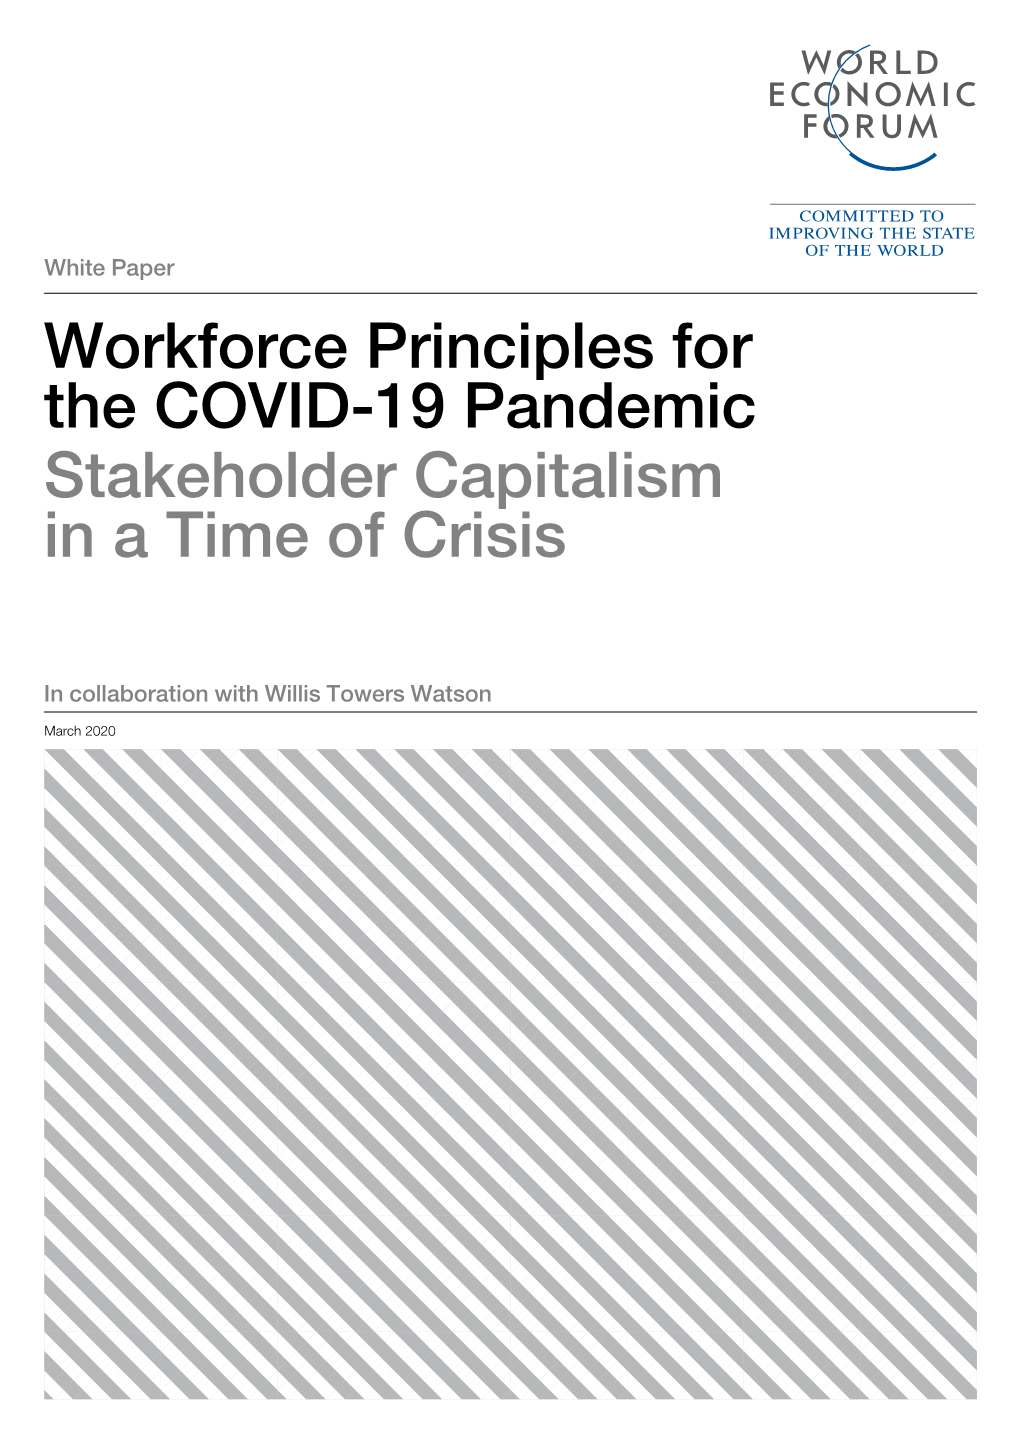 Workforce Principles for the COVID-19 Pandemic Stakeholder Capitalism in a Time of Crisis